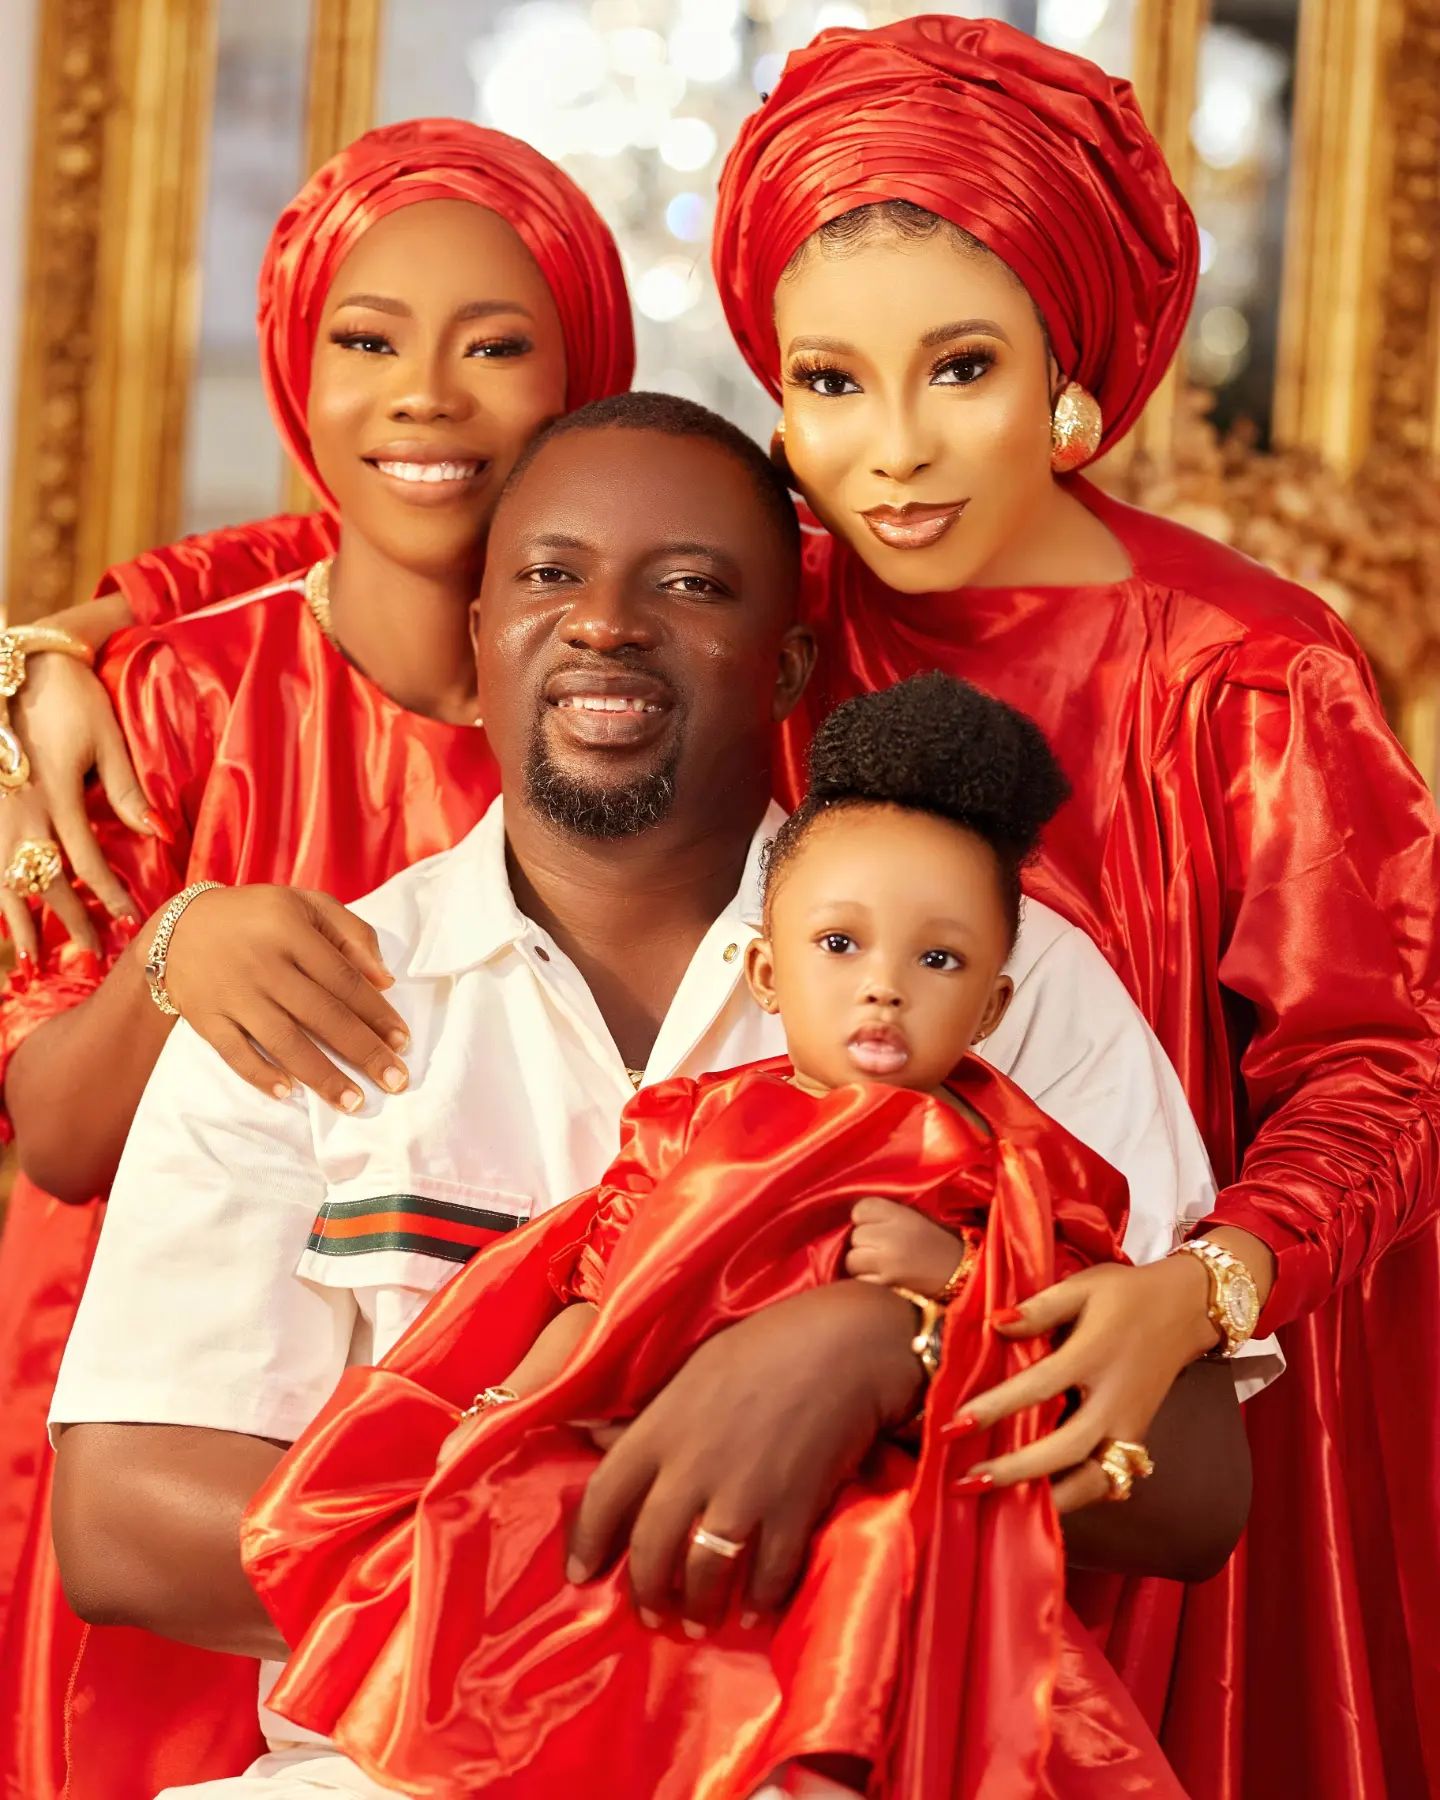  Nollywood Actress Lizzy Anjorin And Her Family Are Celebrating Valentine's Day With A Photoshoot